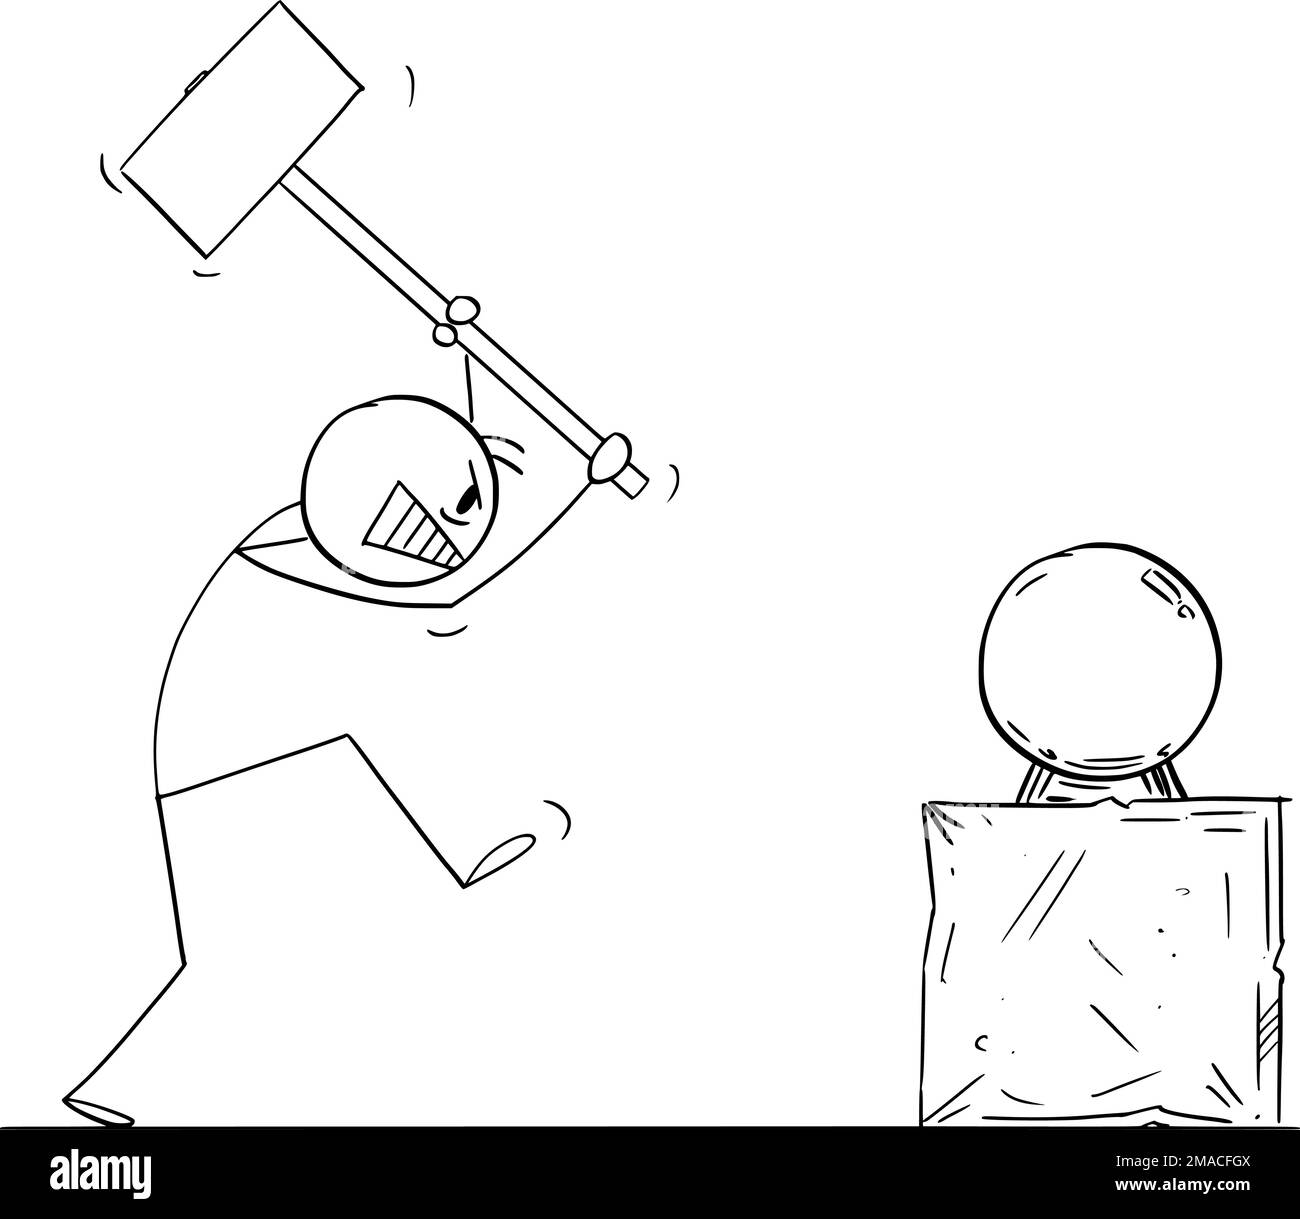 Person With Hammer Trying to Destroy Glass Ball, Vector Cartoon Stick Figure Illustration Stock Vector